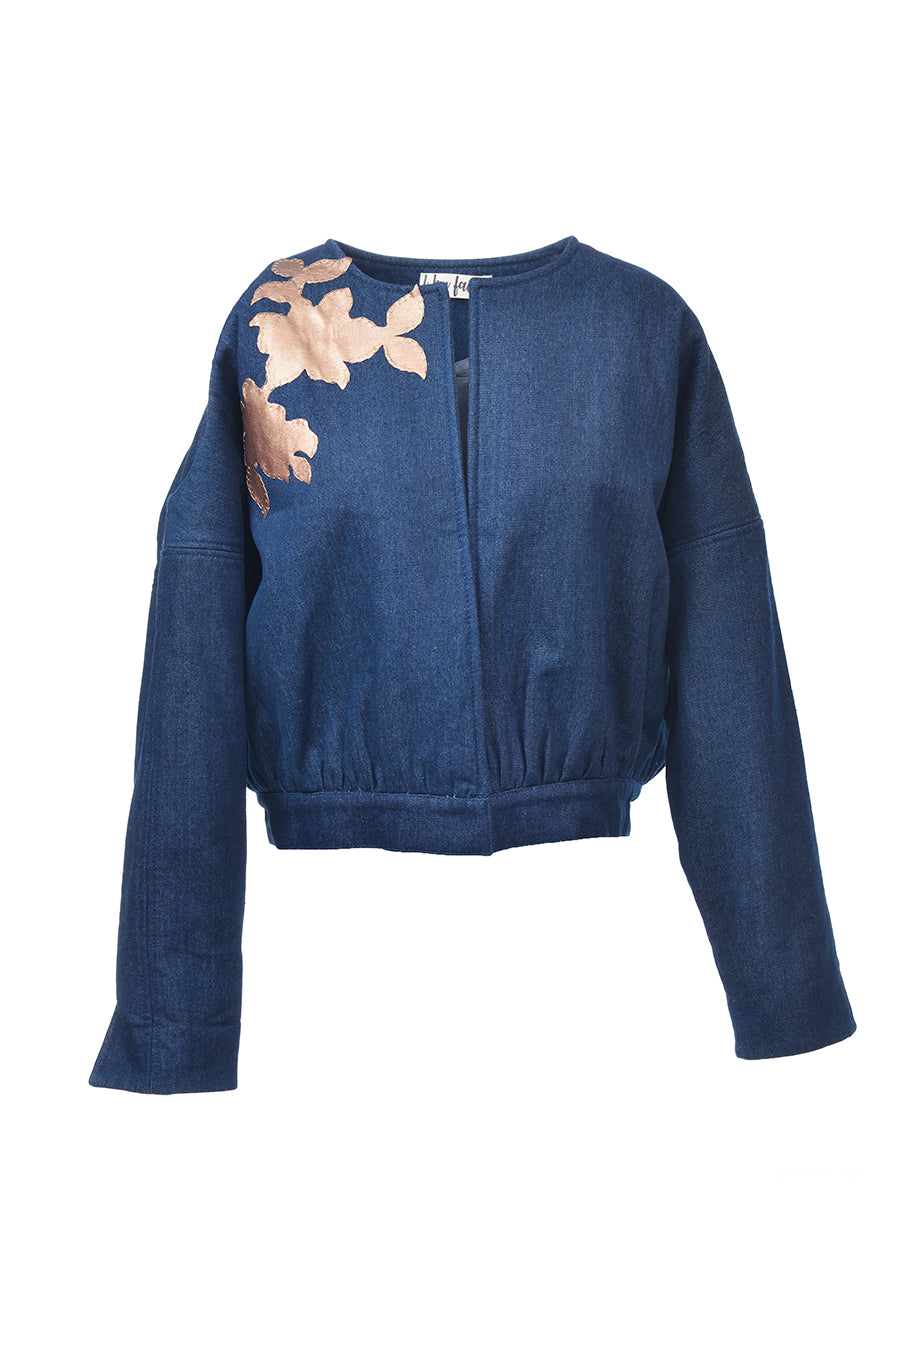 F by Faina Embroidered Bomber